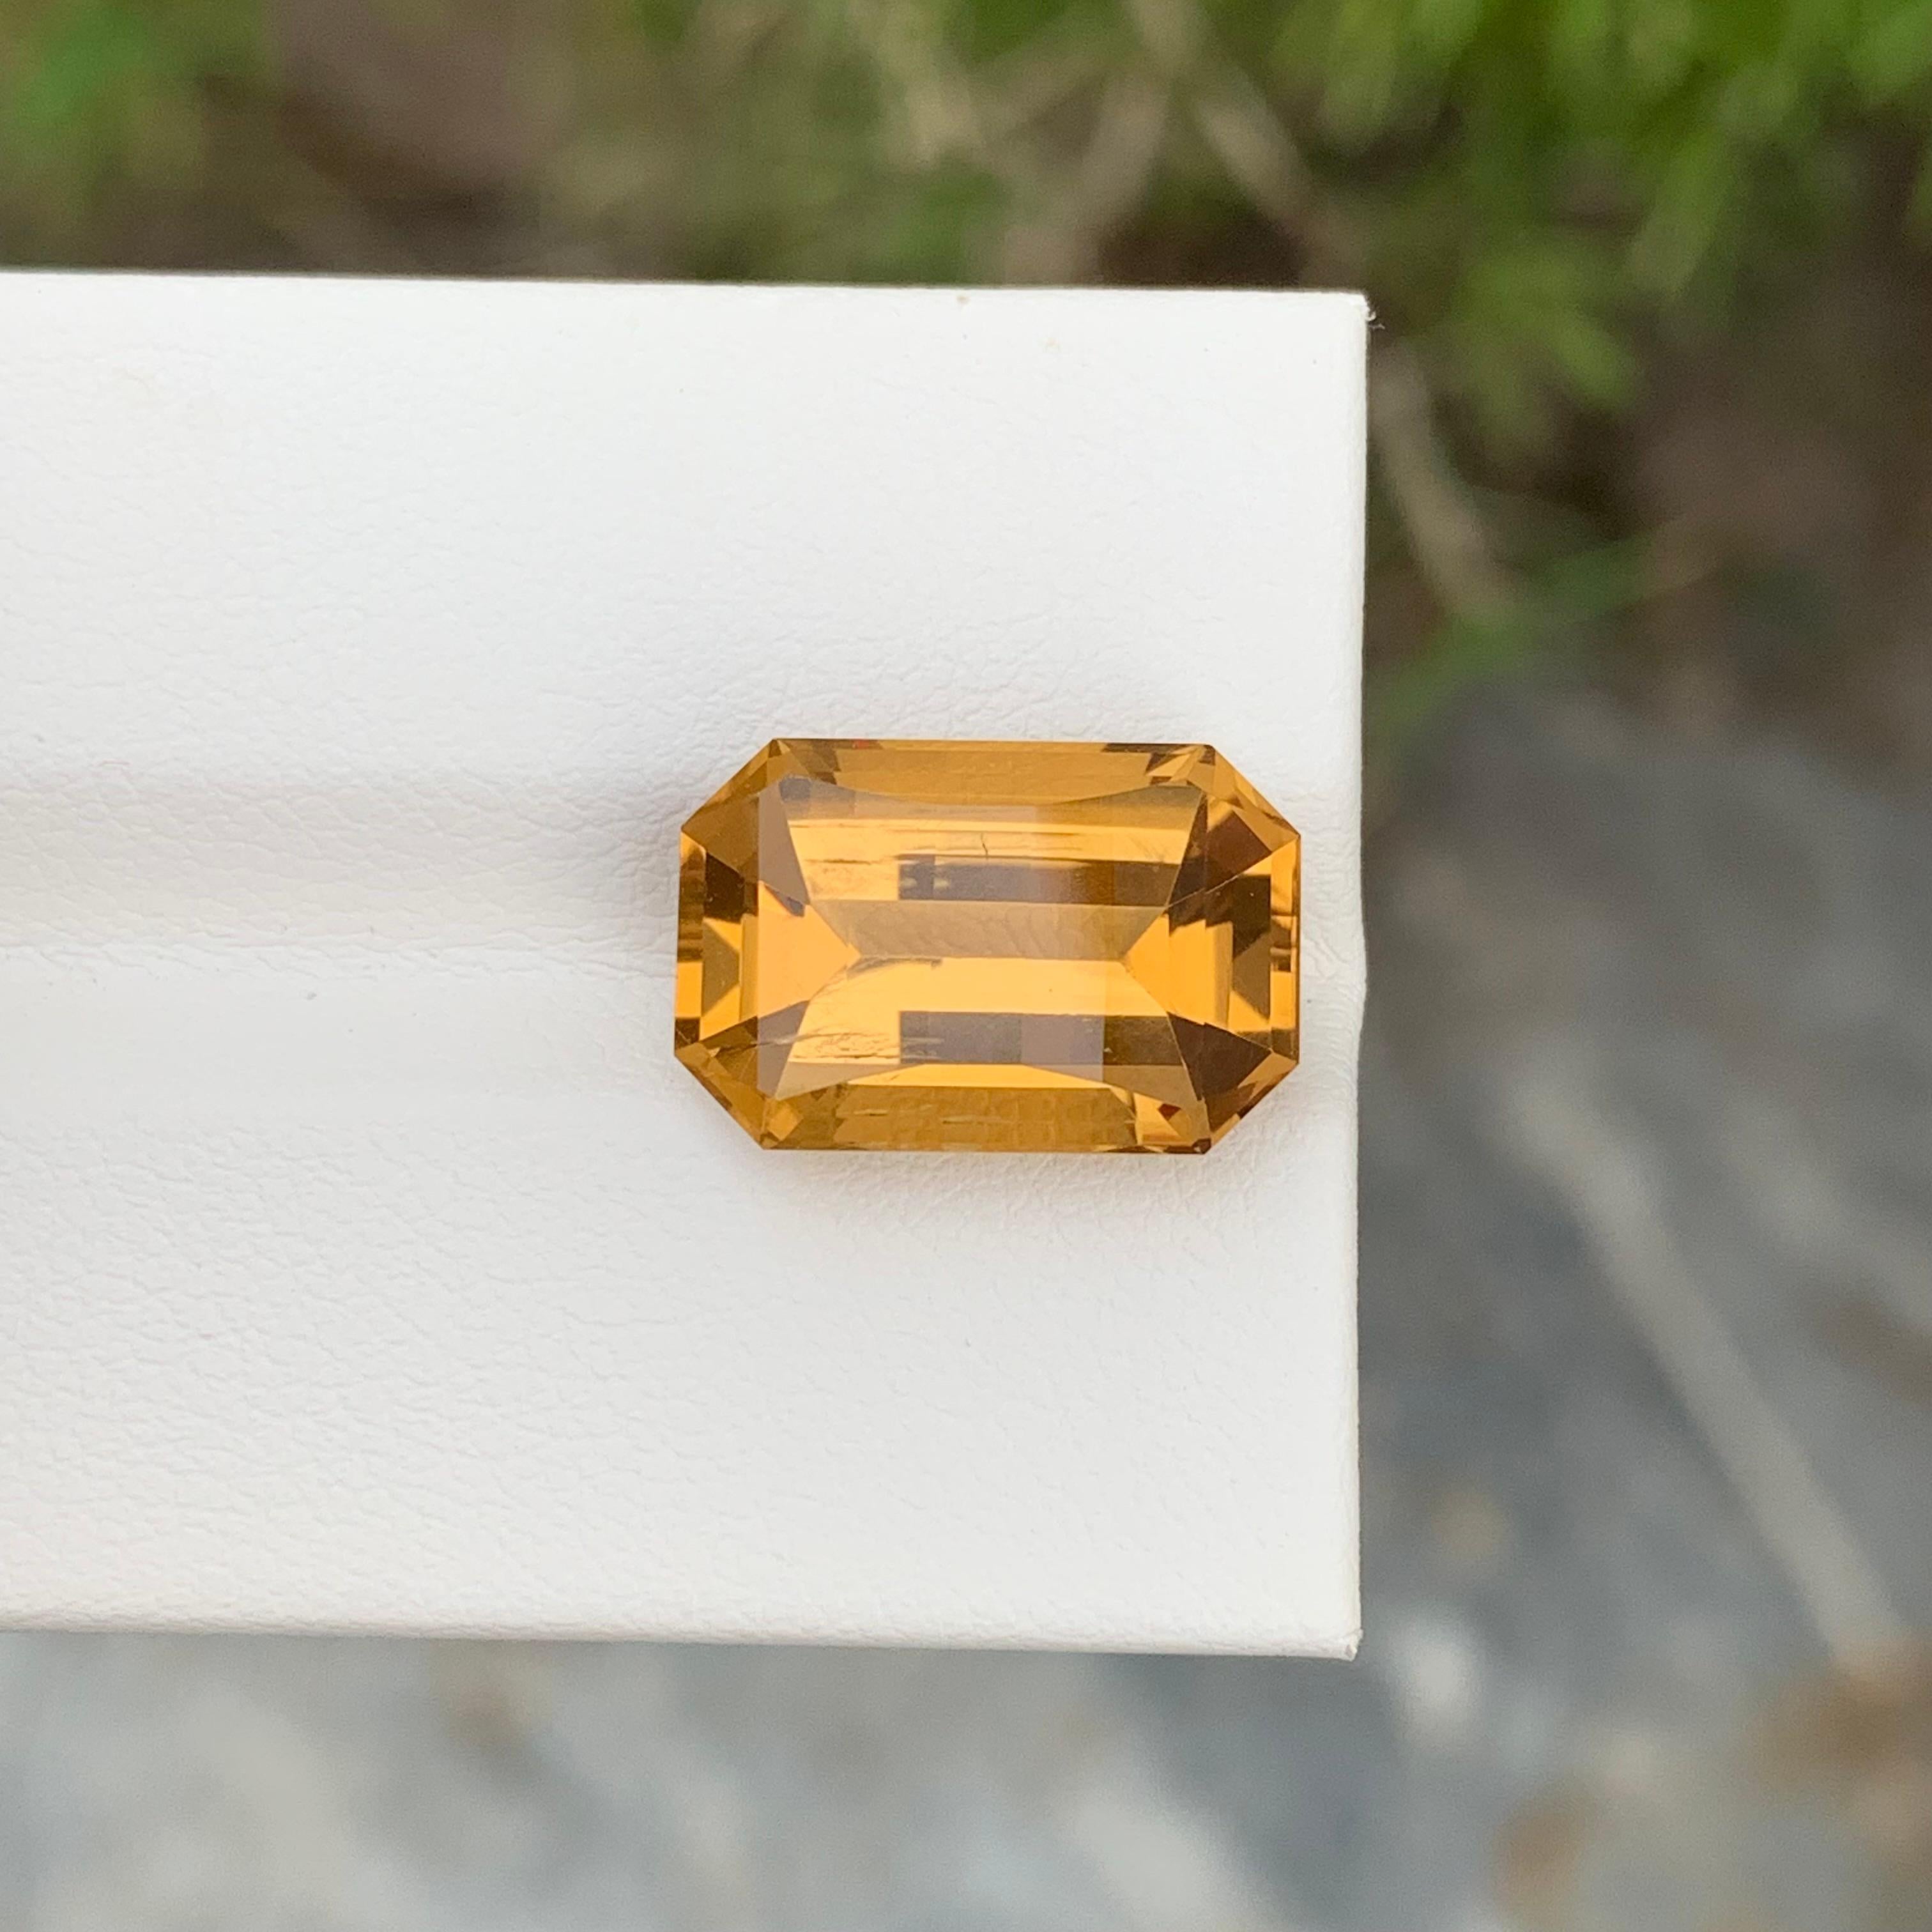 Loose Citrine
Weight: 7.80 Carats
Dimension: 15 x 9.9 x 7.9 Mm
Origin: Brazil
Cut: Pixelated 
Colour: Yellow
Treatment: Non
Certficate: On Demand
Shape: Emerald


Citrine, a radiant and versatile gemstone, enchants with its warm, golden hues and